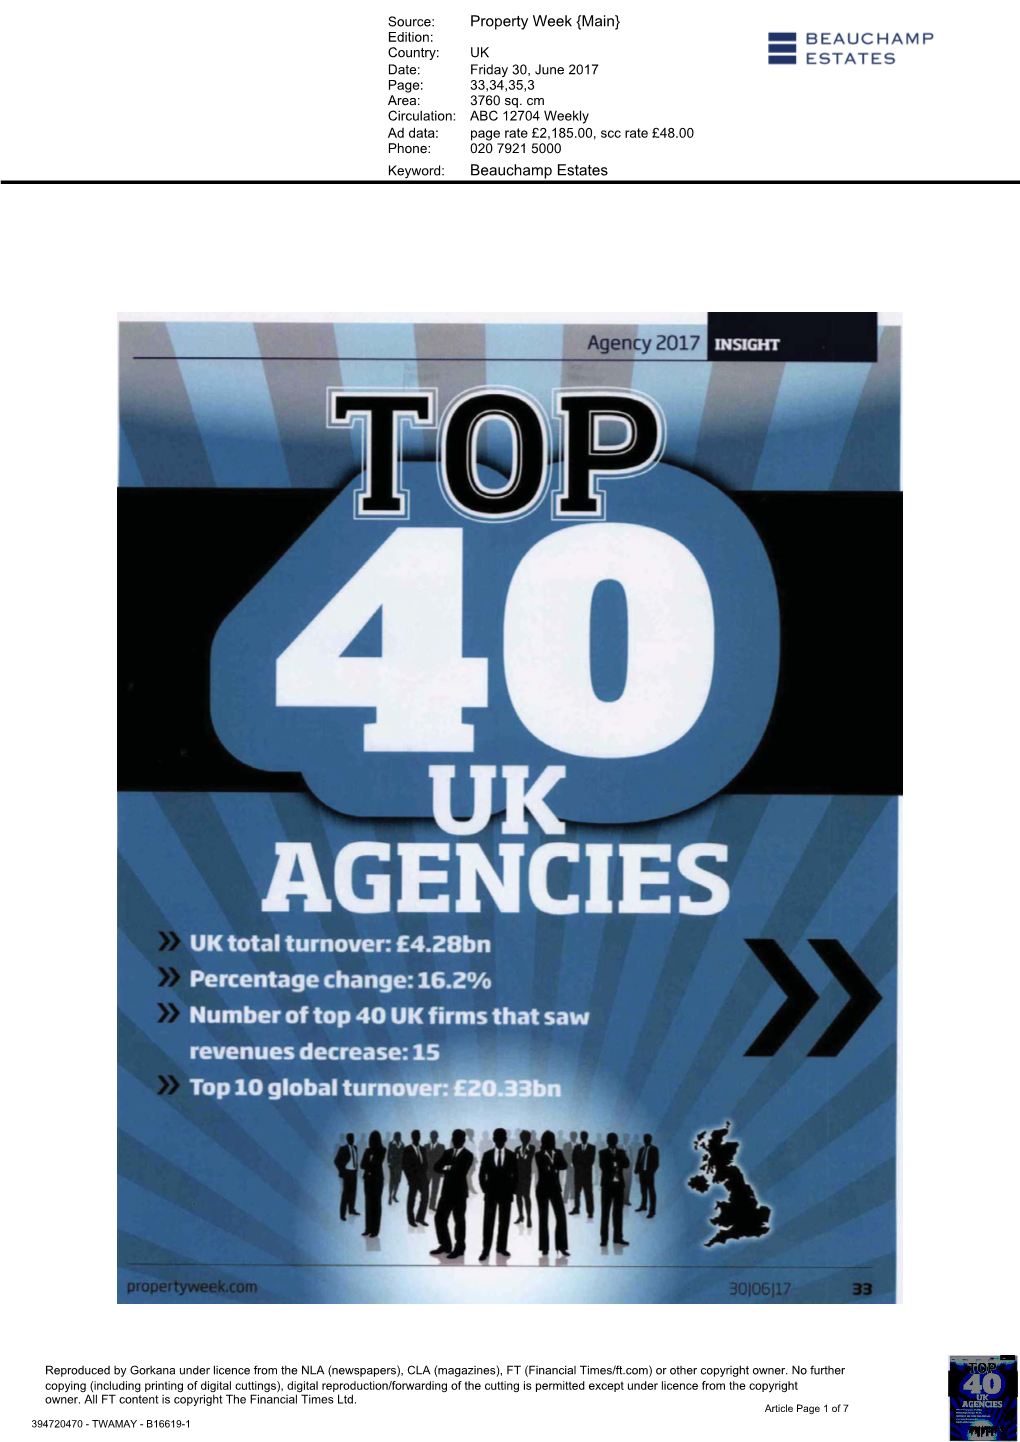 AGENCIES UK Total Turnover: £4.28Bn Percentage Change: 16.2% Number of Top 40 UK Firms That Saw Revenues Decrease: 15 Top 10 Global Turnover: £20.33Bn